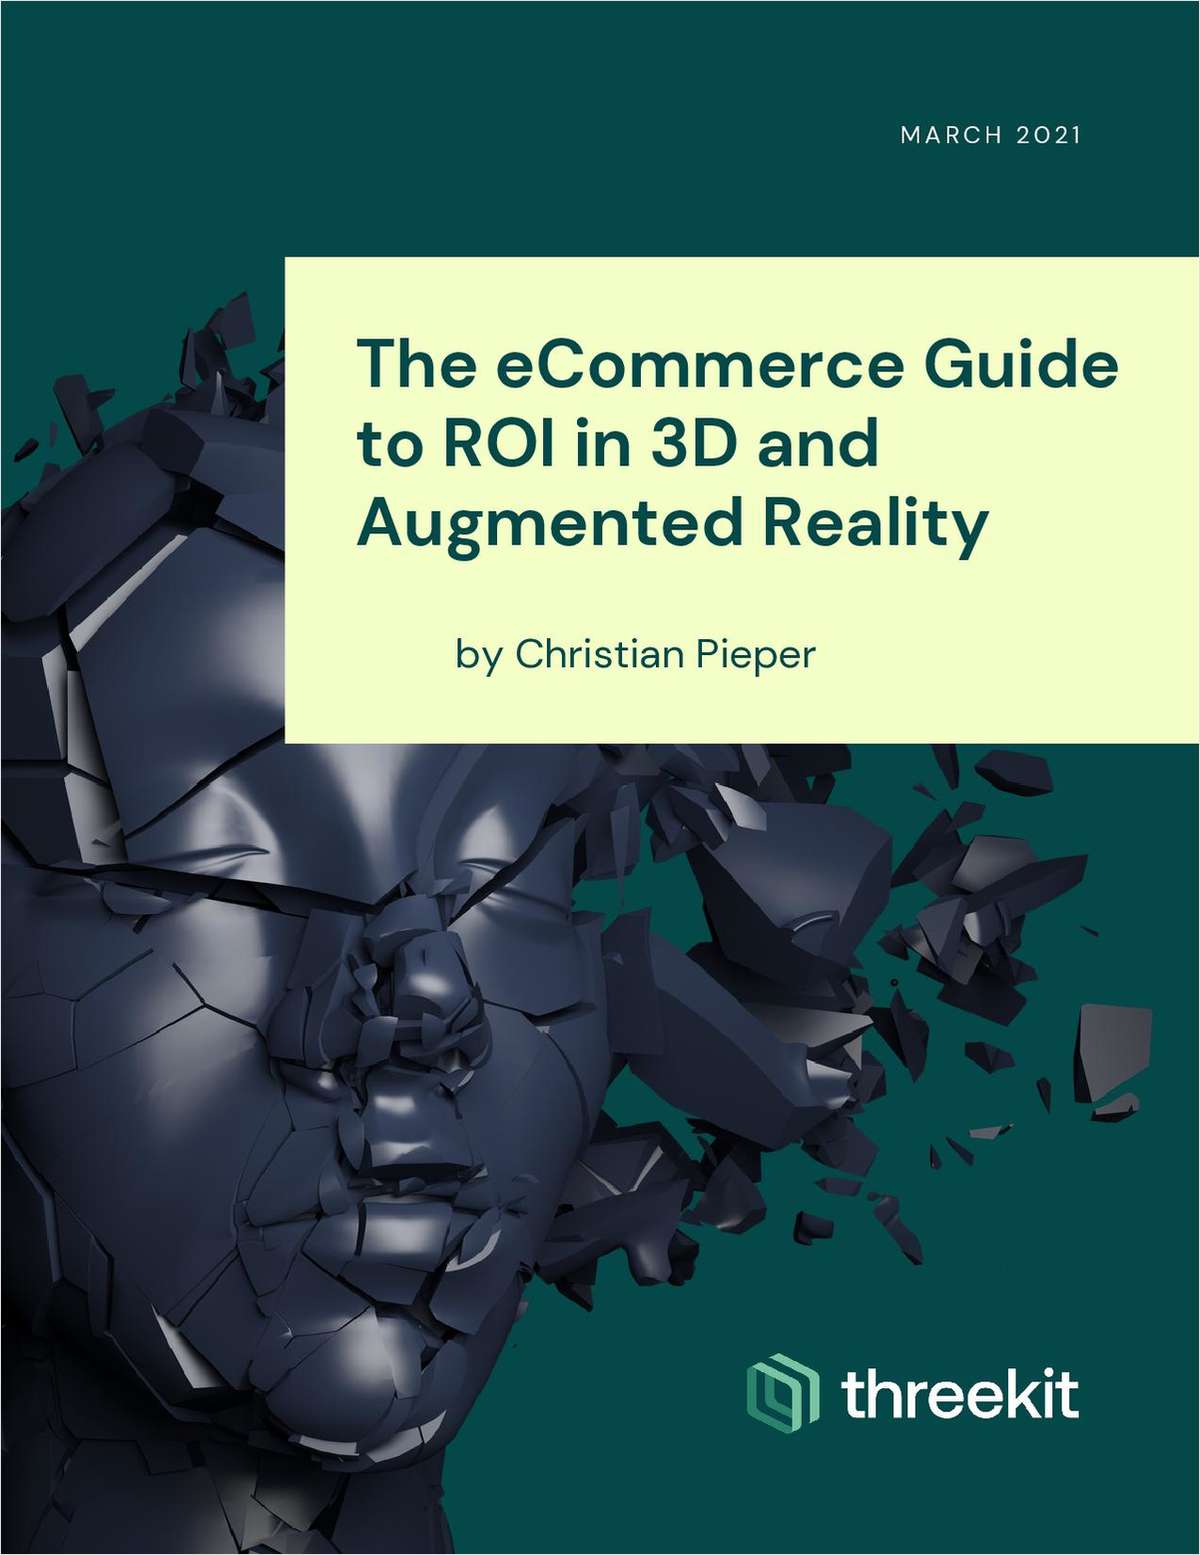 The eCommerce Guide to ROI in 3D and Augmented Reality